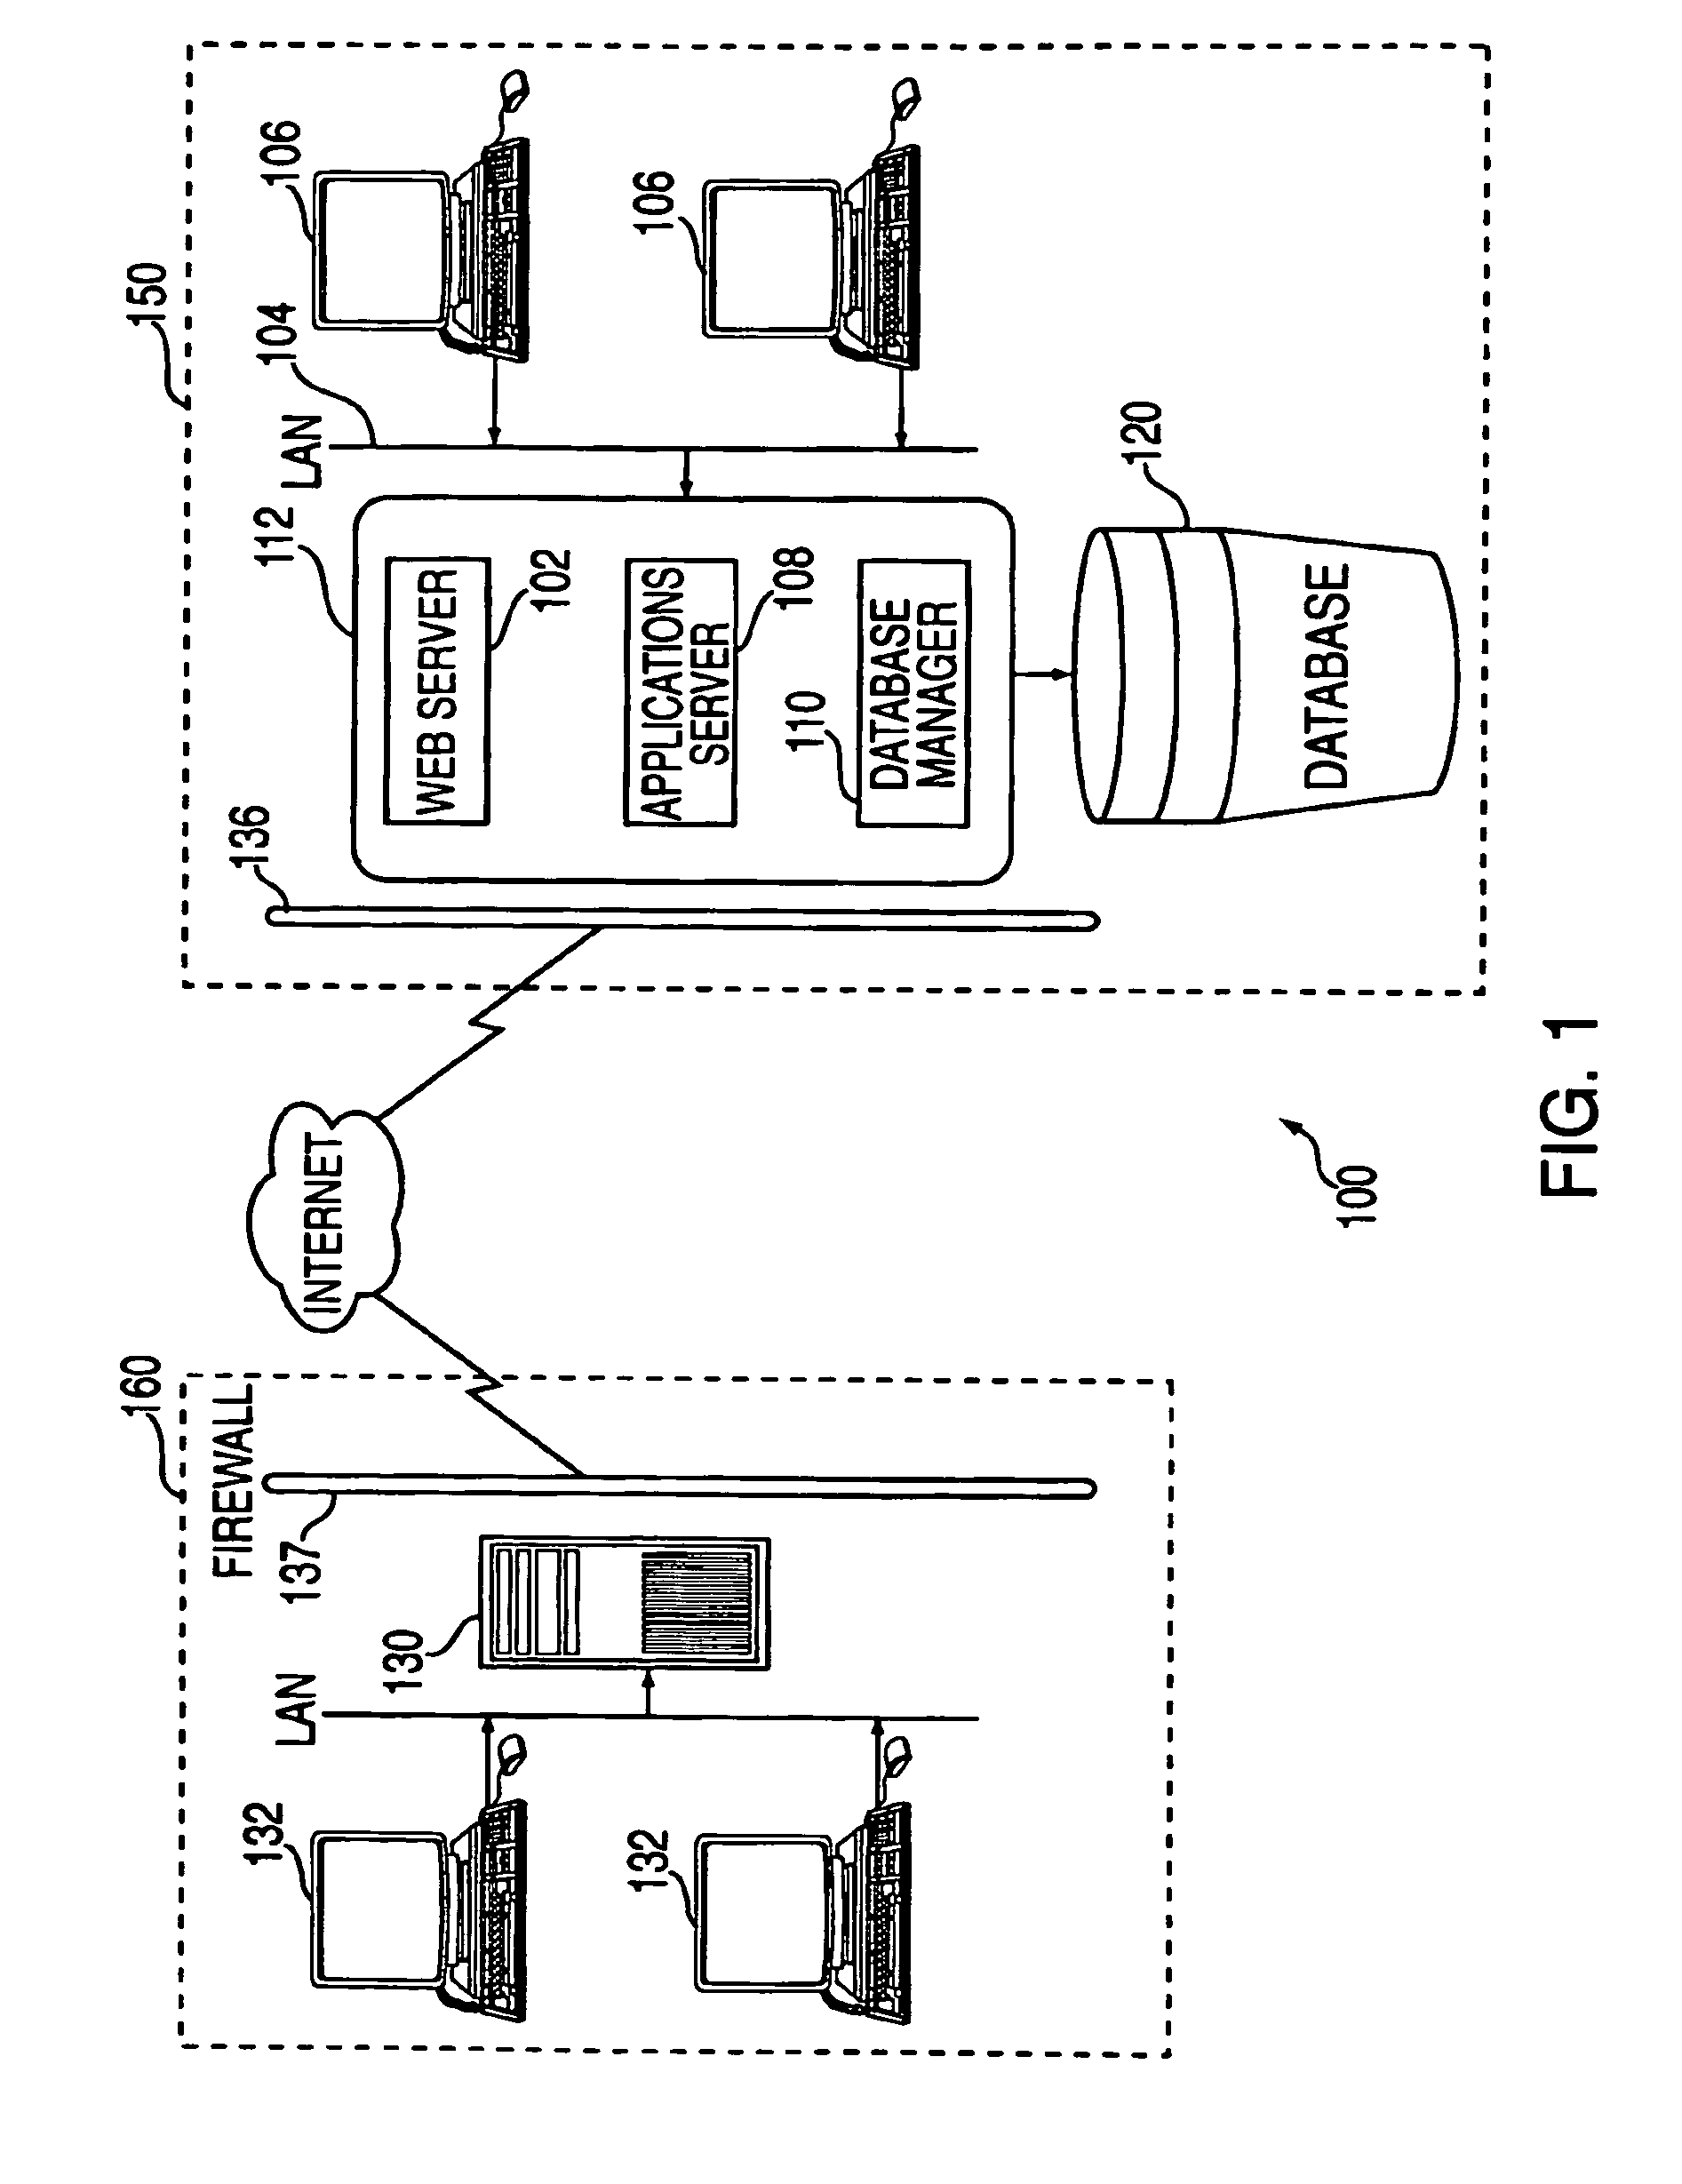 Parts requirement planning system and method across an extended supply chain